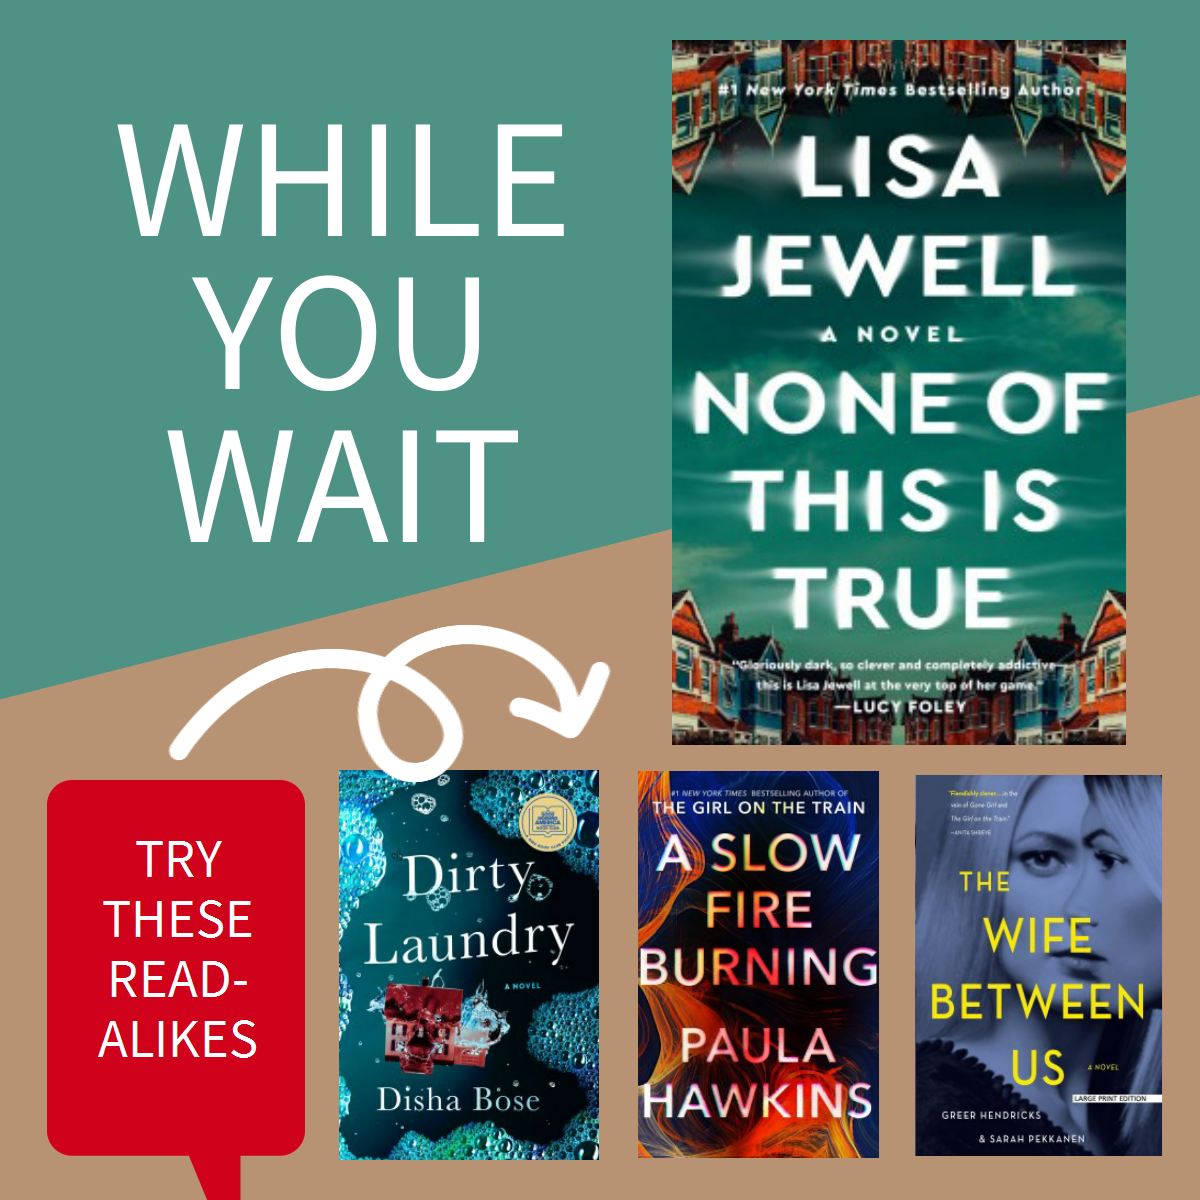 While you wait for None of This is True by Lisa Jewell, try these read-alikes graphic